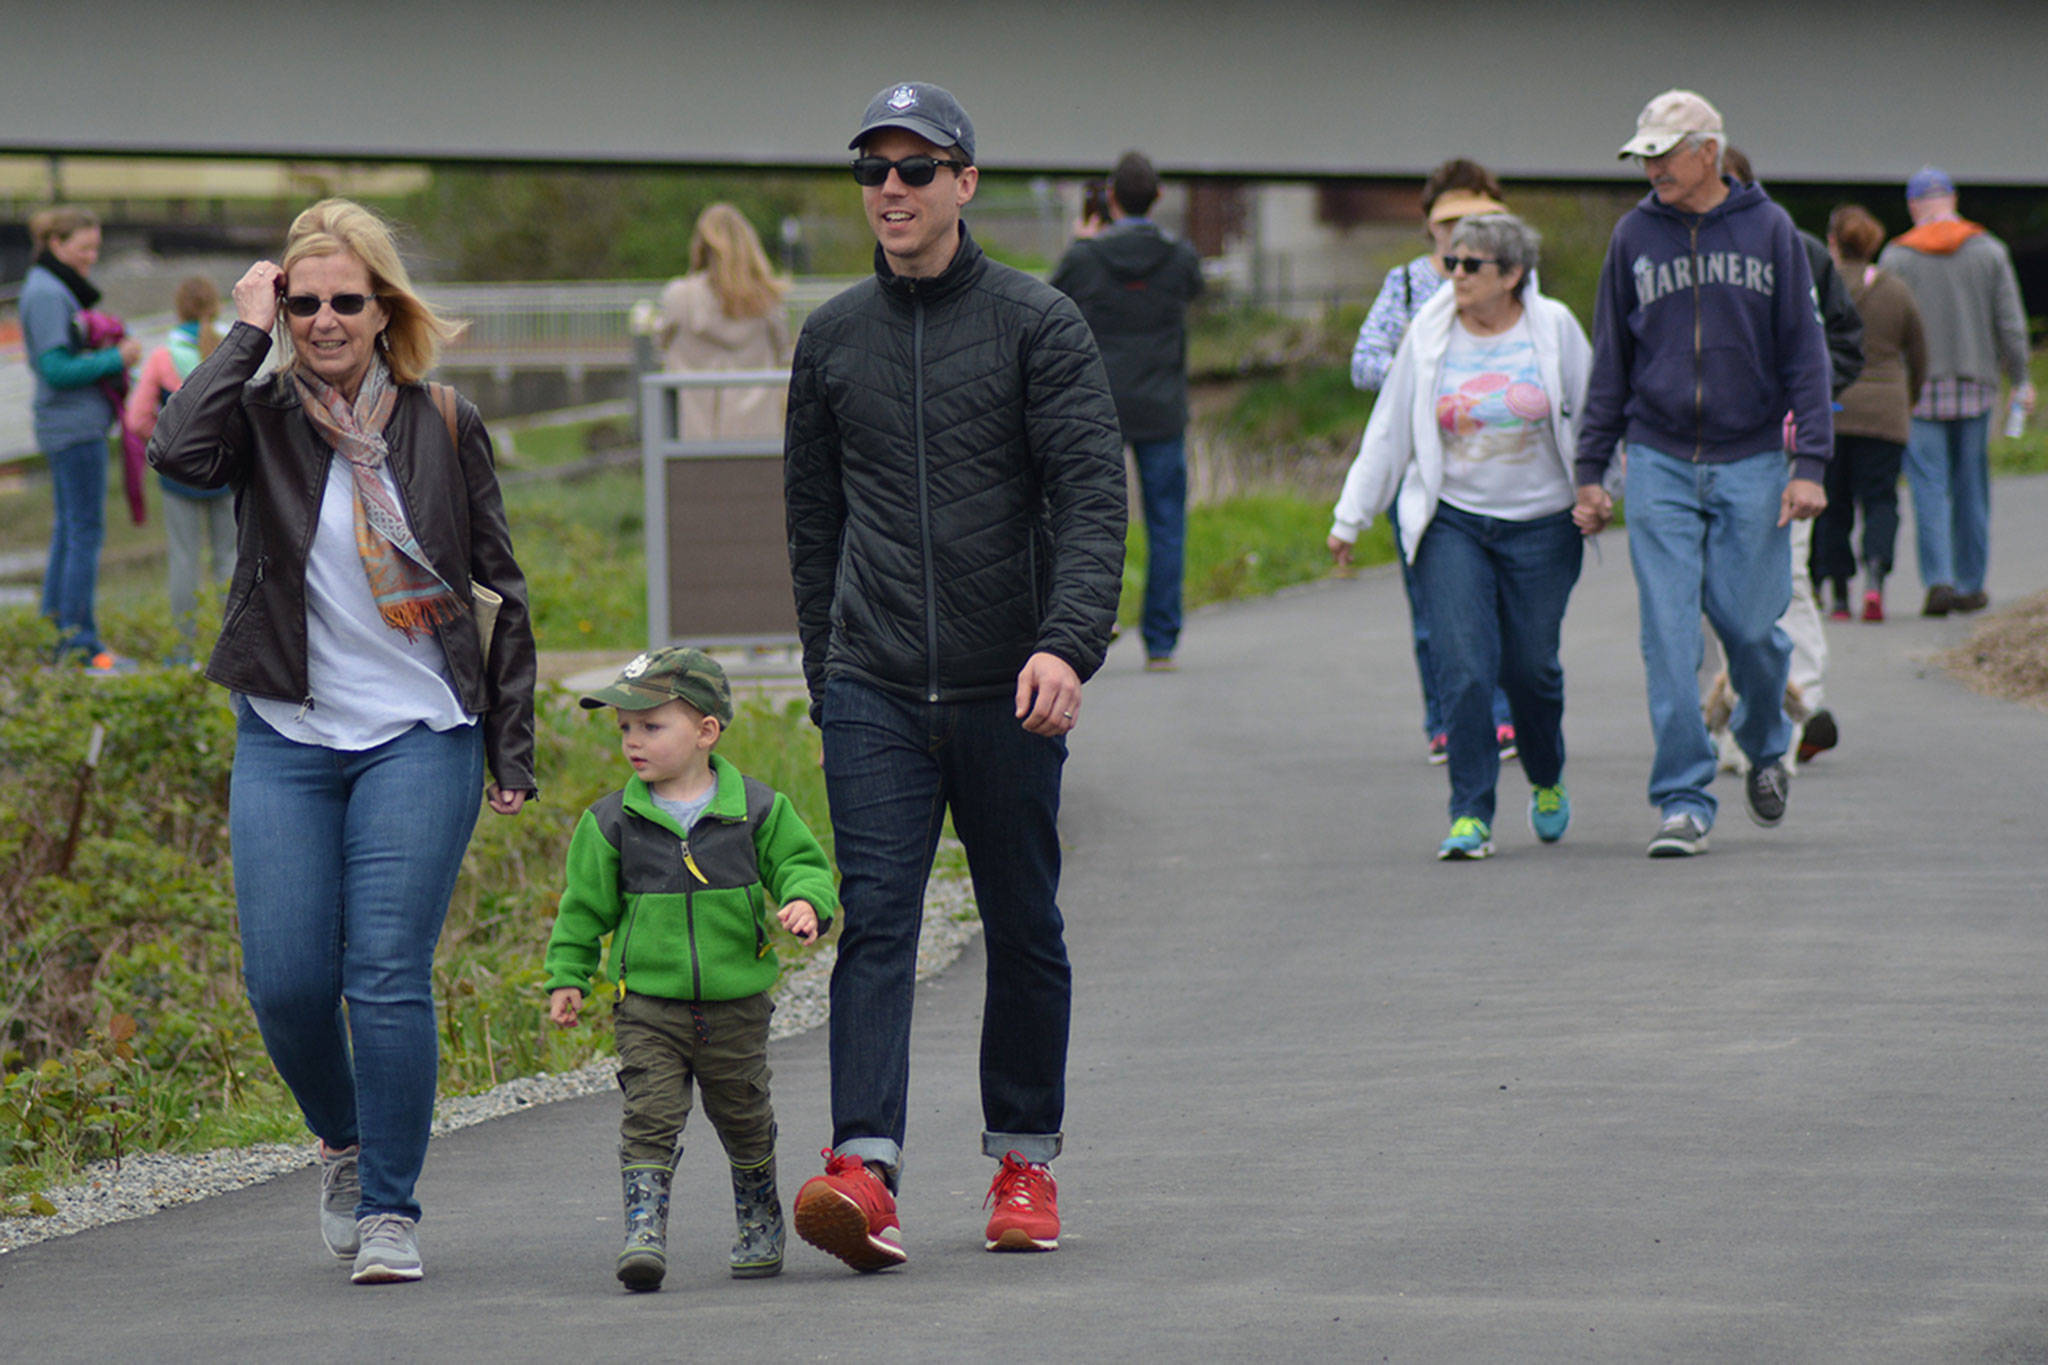 120 attend opening of Ebey Waterfront Trail (slide show)